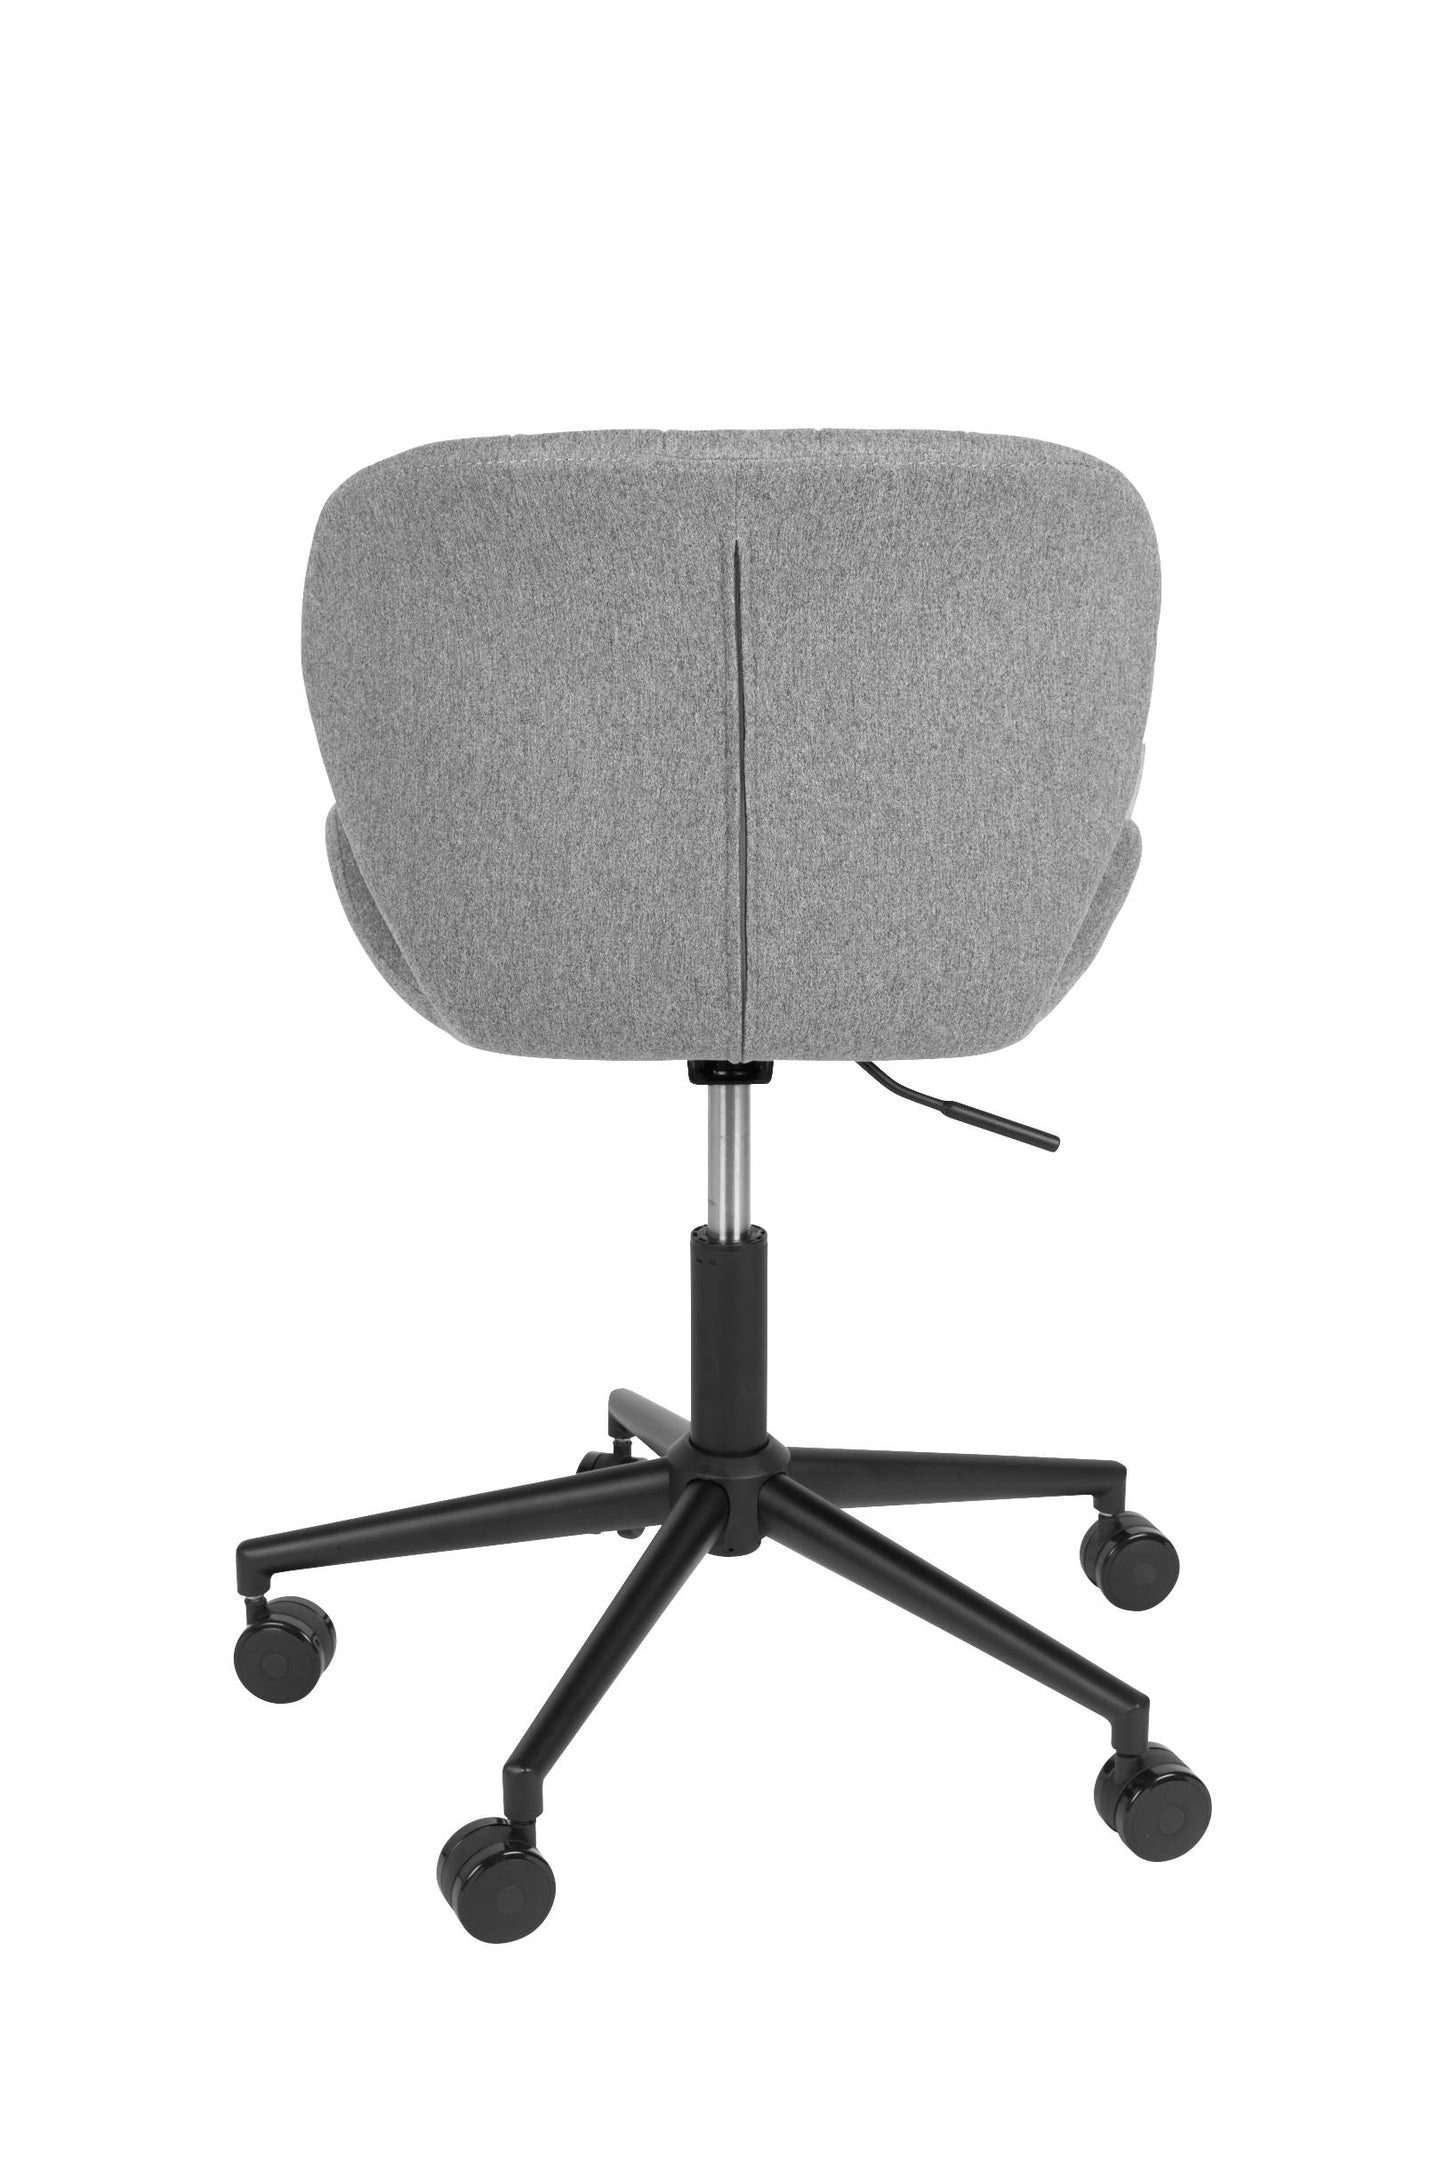 Zuiver | OFFICE CHAIR OMG BLACK/GREY Default Title